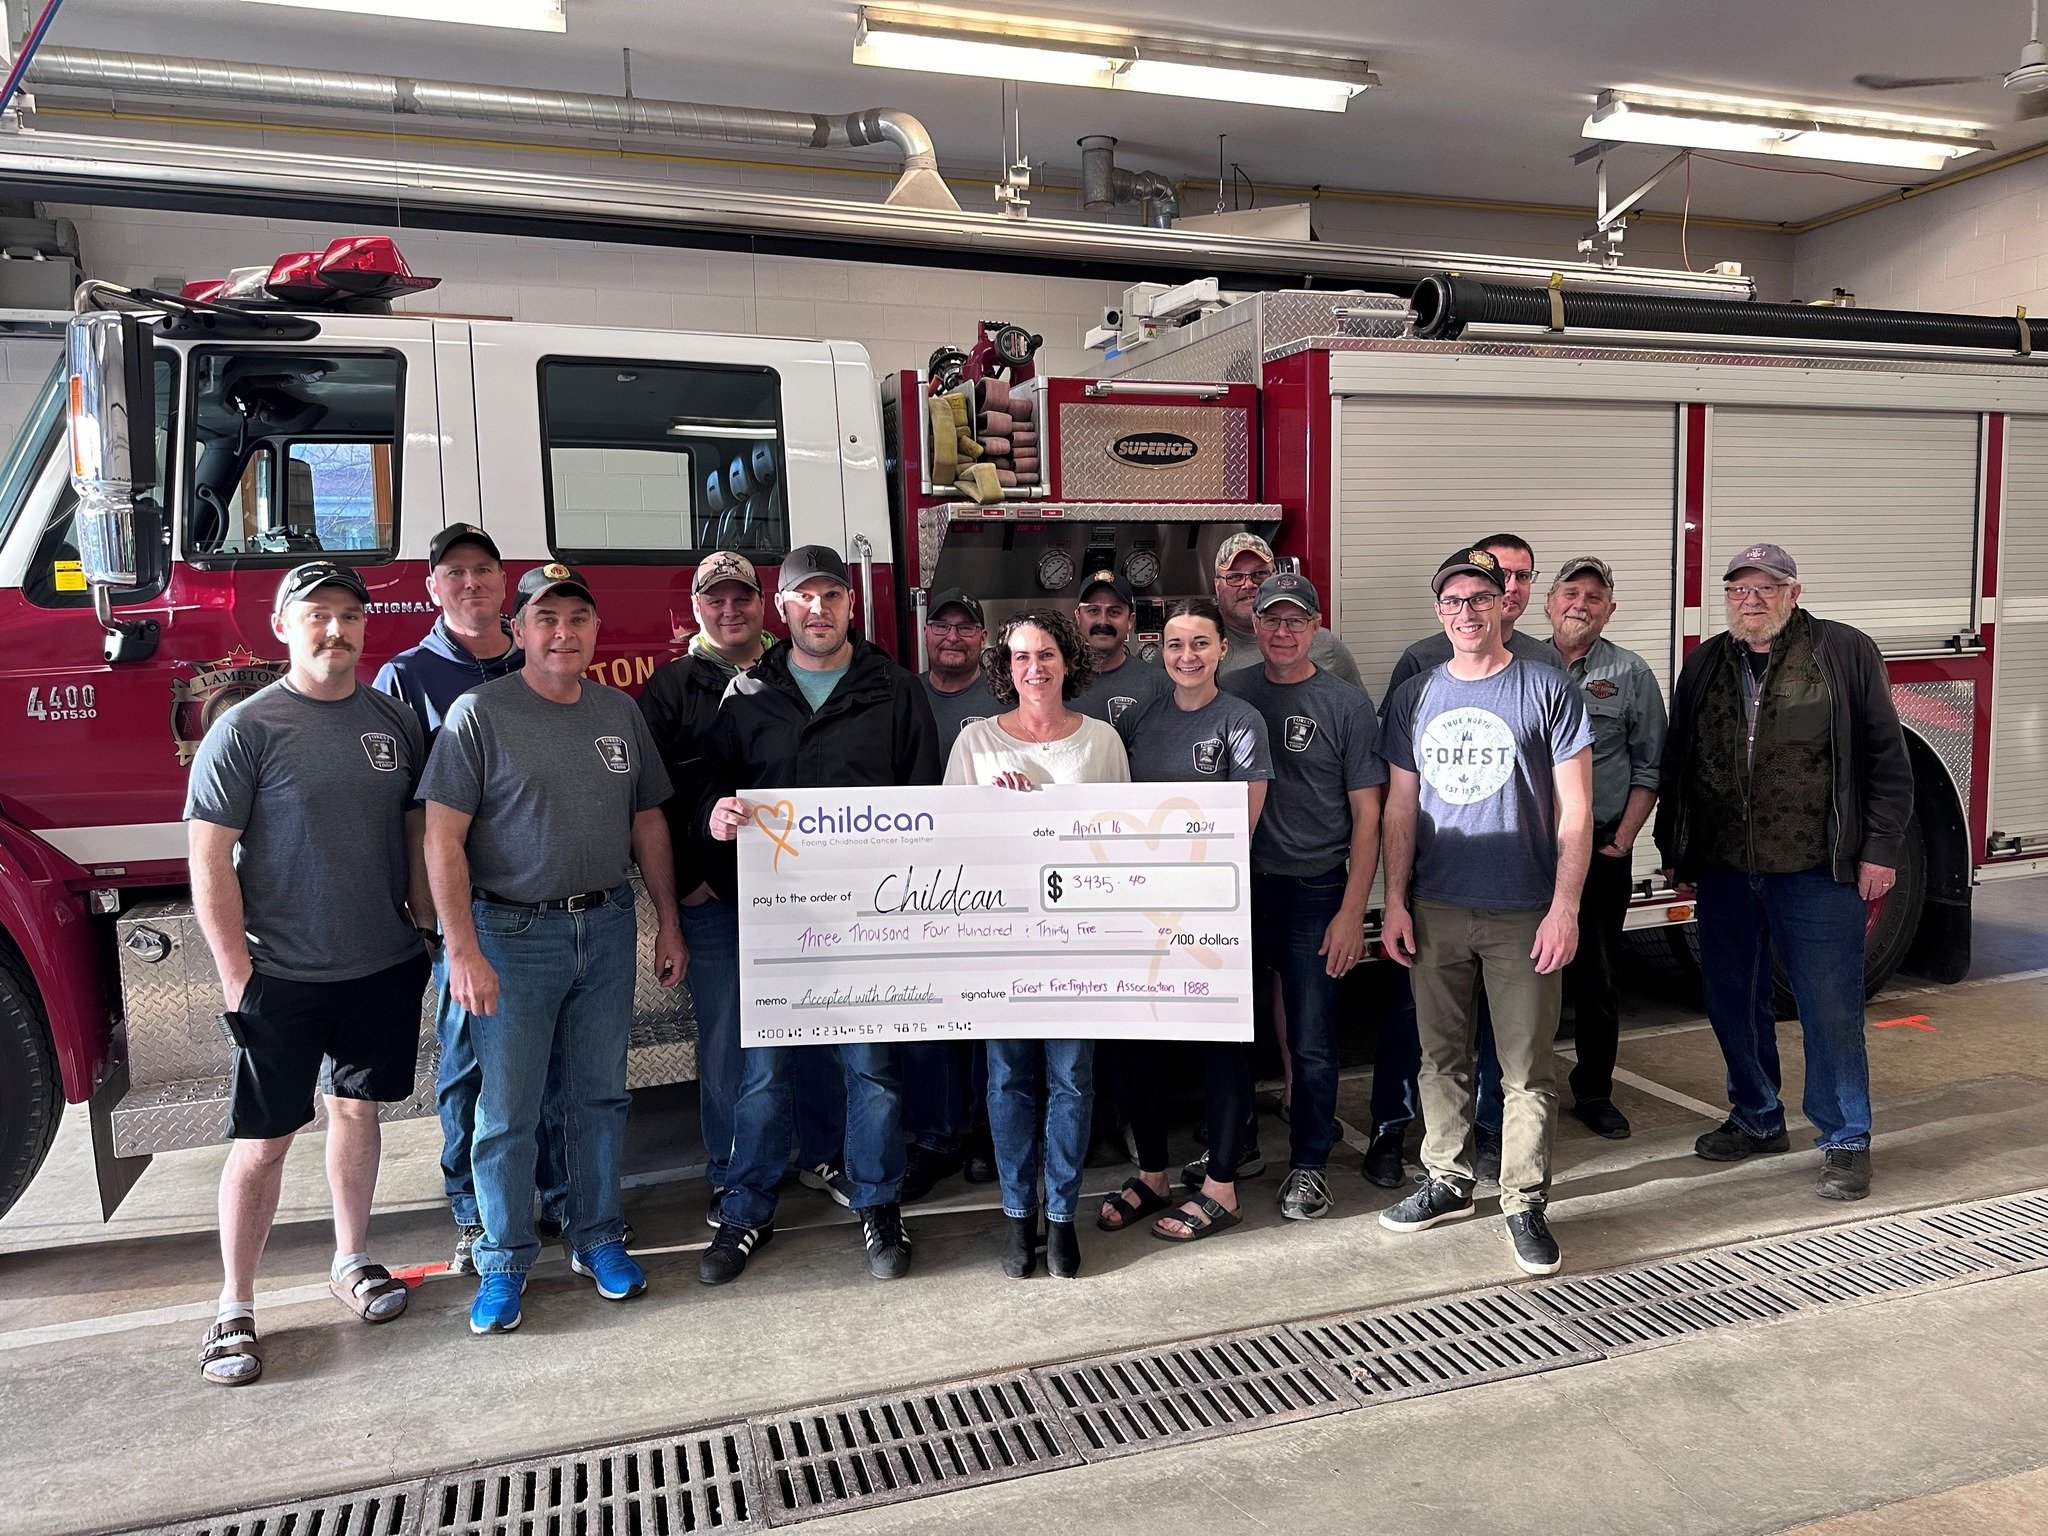 BIG thanks to everyone involved in the Forest Firefighter&rsquo;s Association 1888 Annual Charity Classic for giving your time, passion, and energy to raise funds to help kids and their families affected by childhood cancer, and for taking the time t